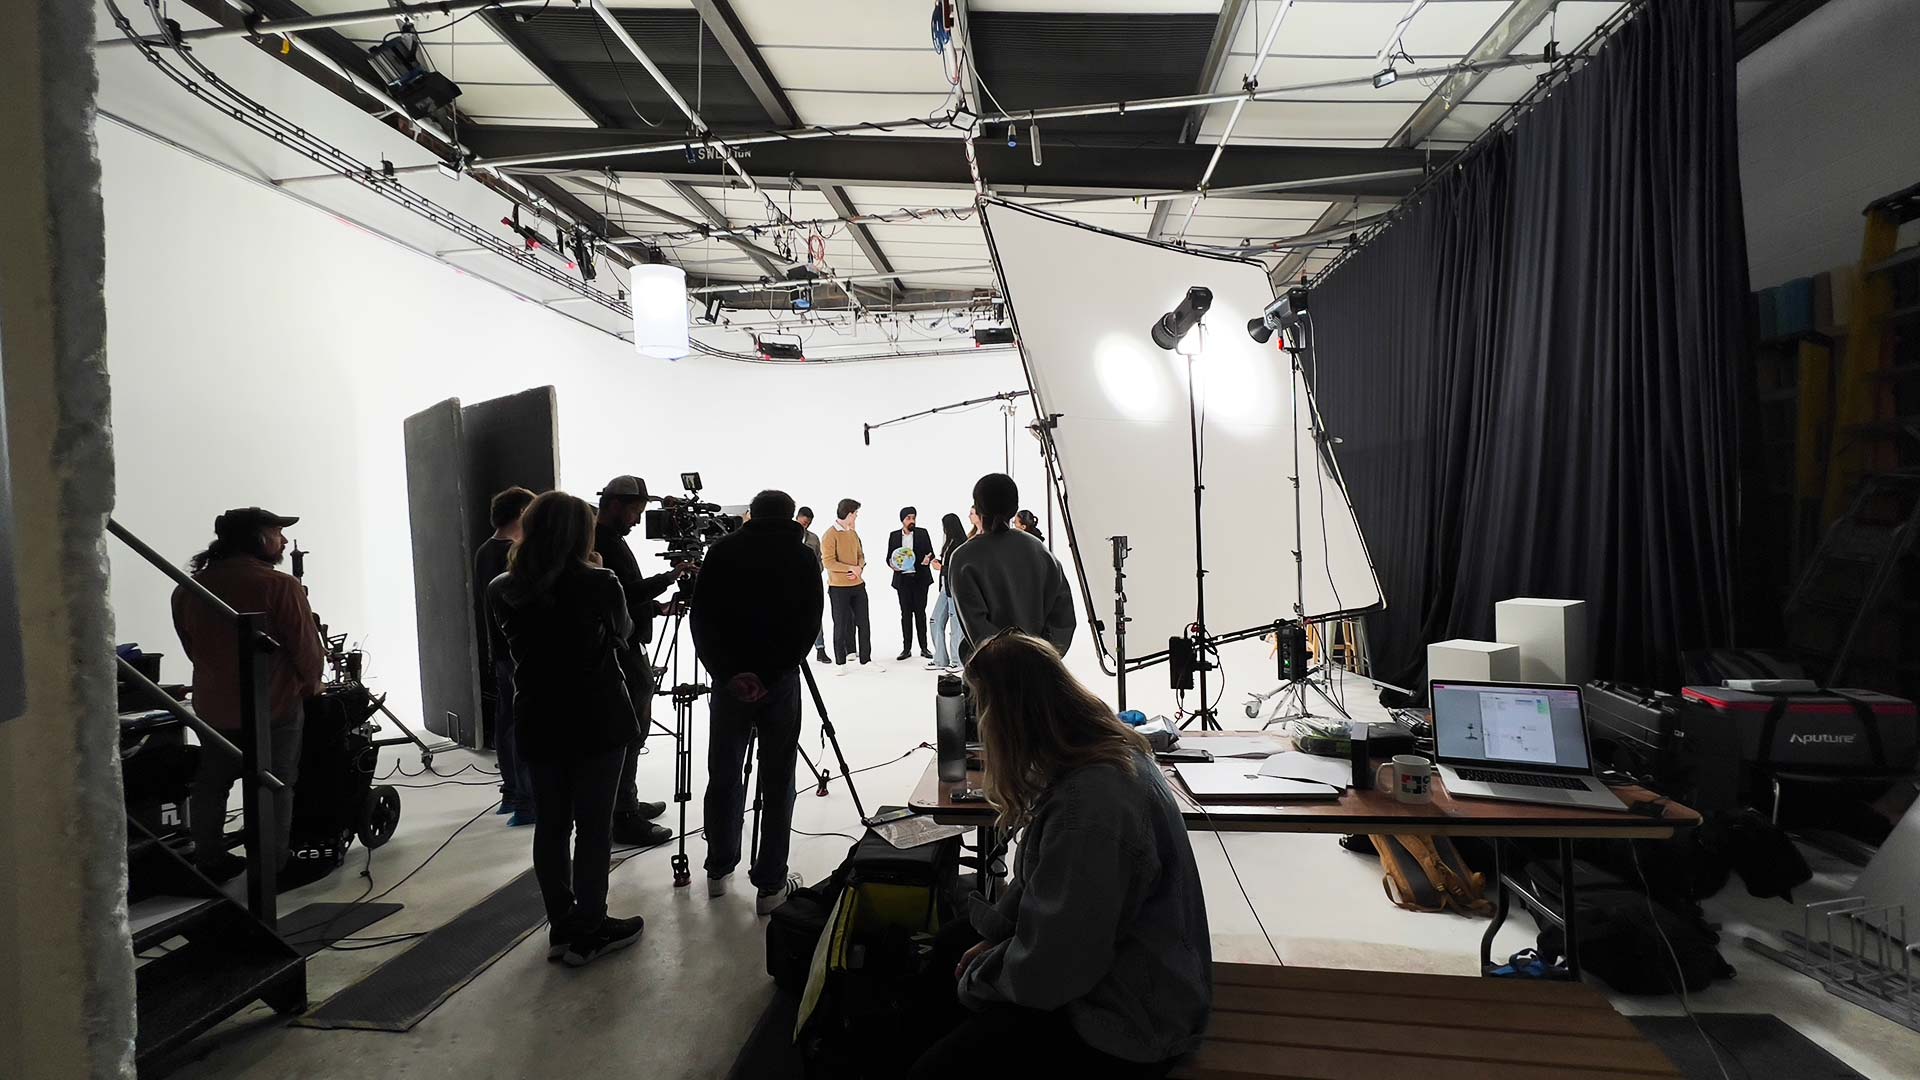 Corporate Video Shoots at Cineview Studios on Large Infinity Cove